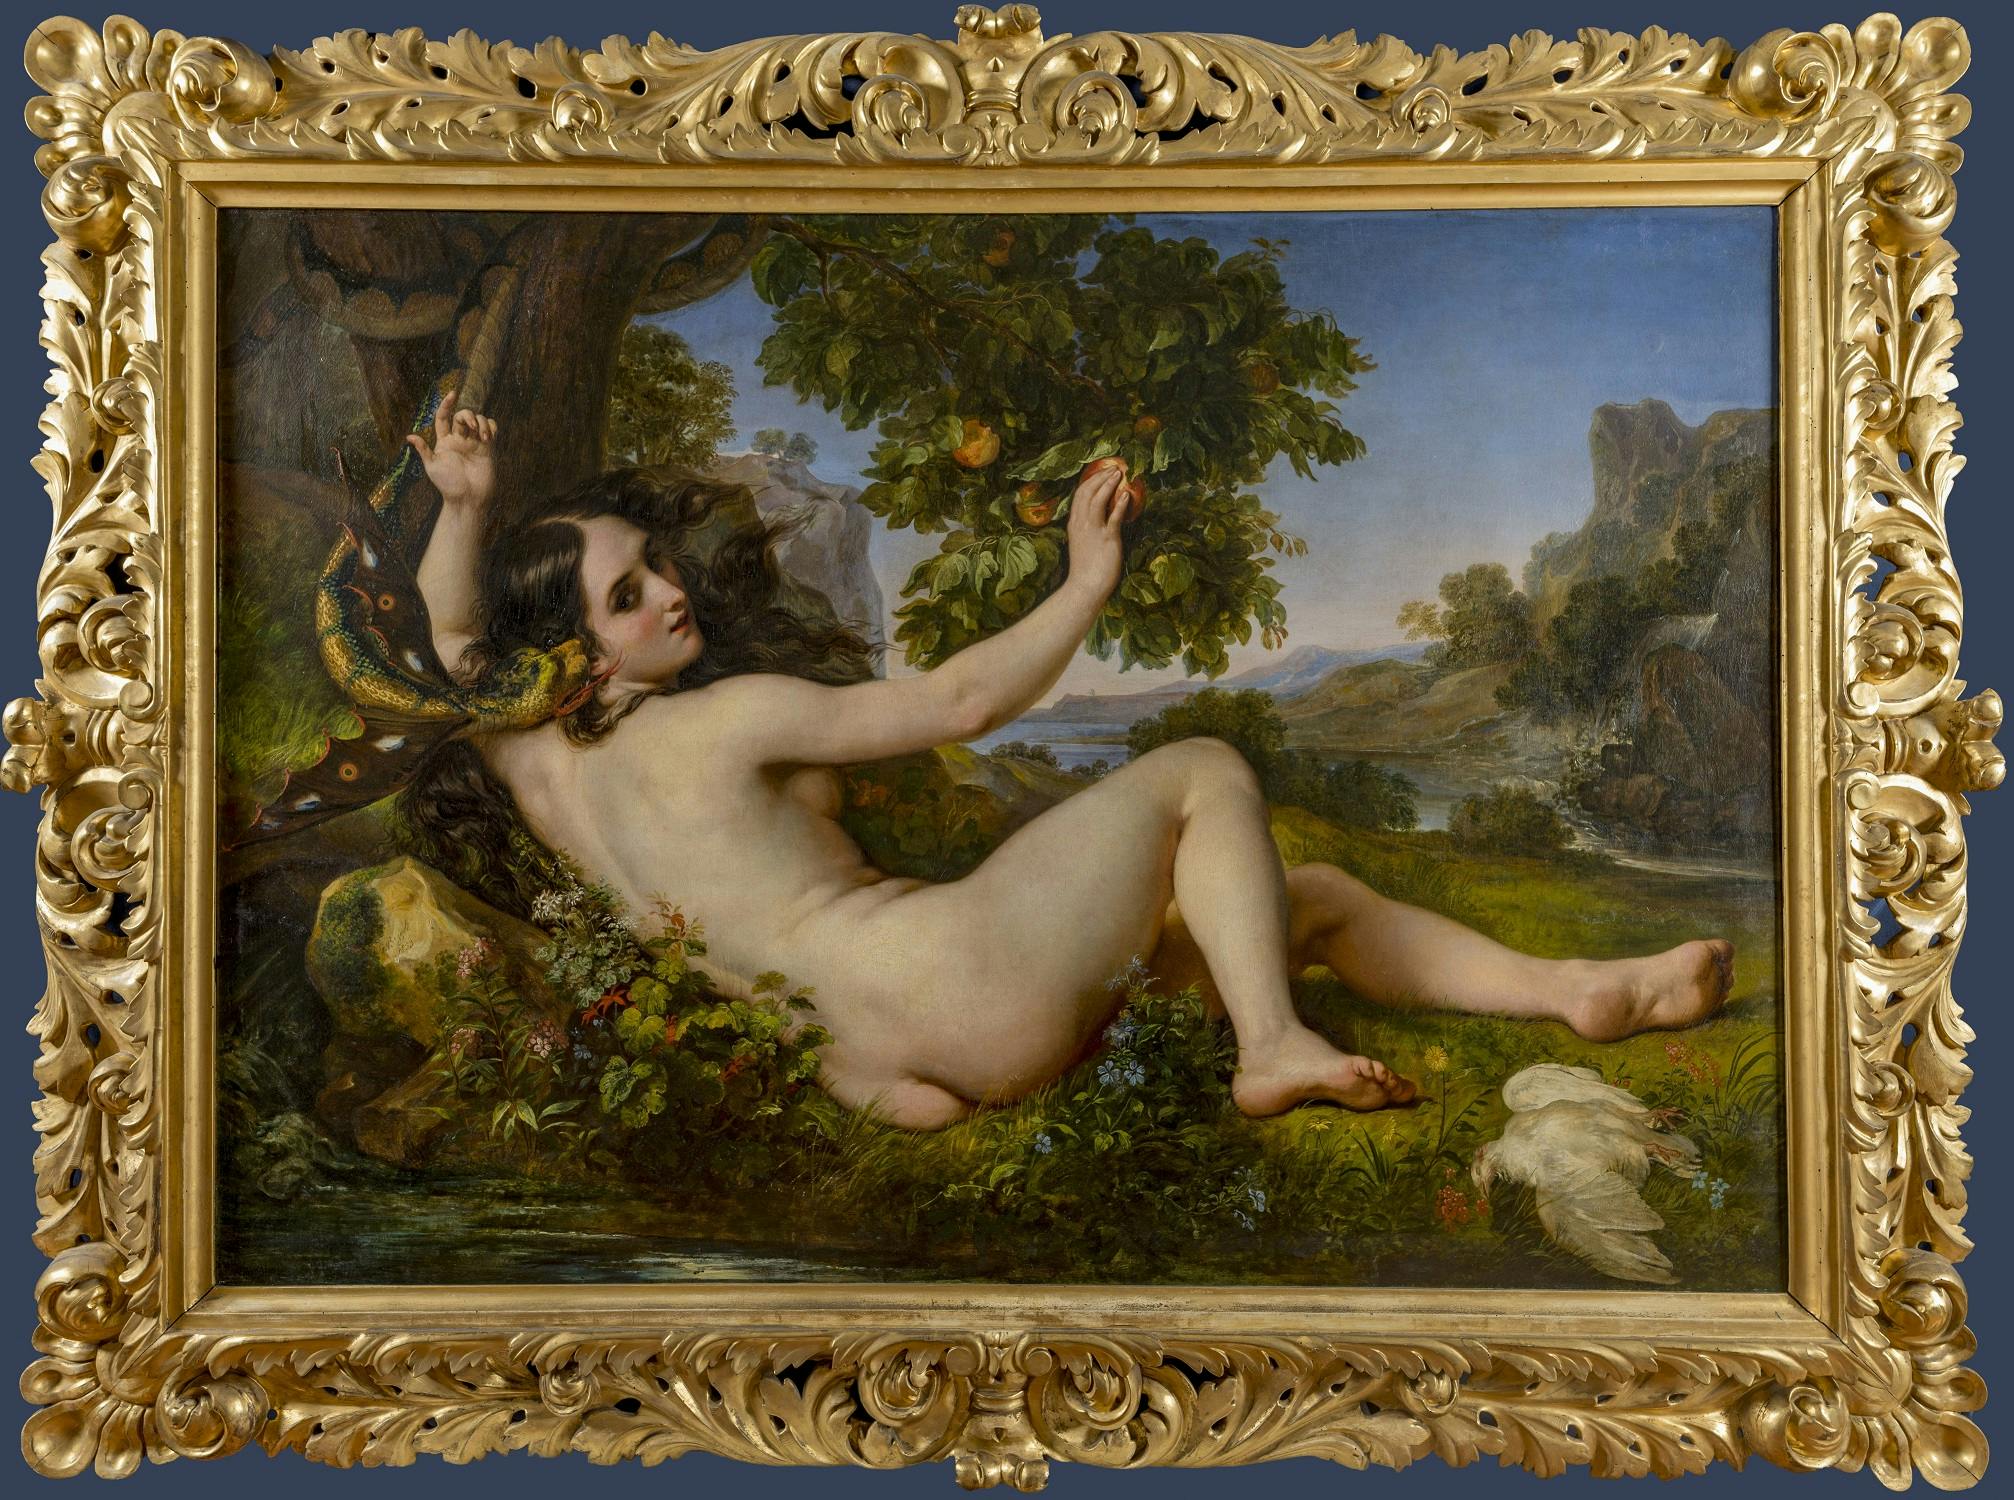 A new painting by Giuseppe Bezzuoli has entered the Uffizi Galleries' collection